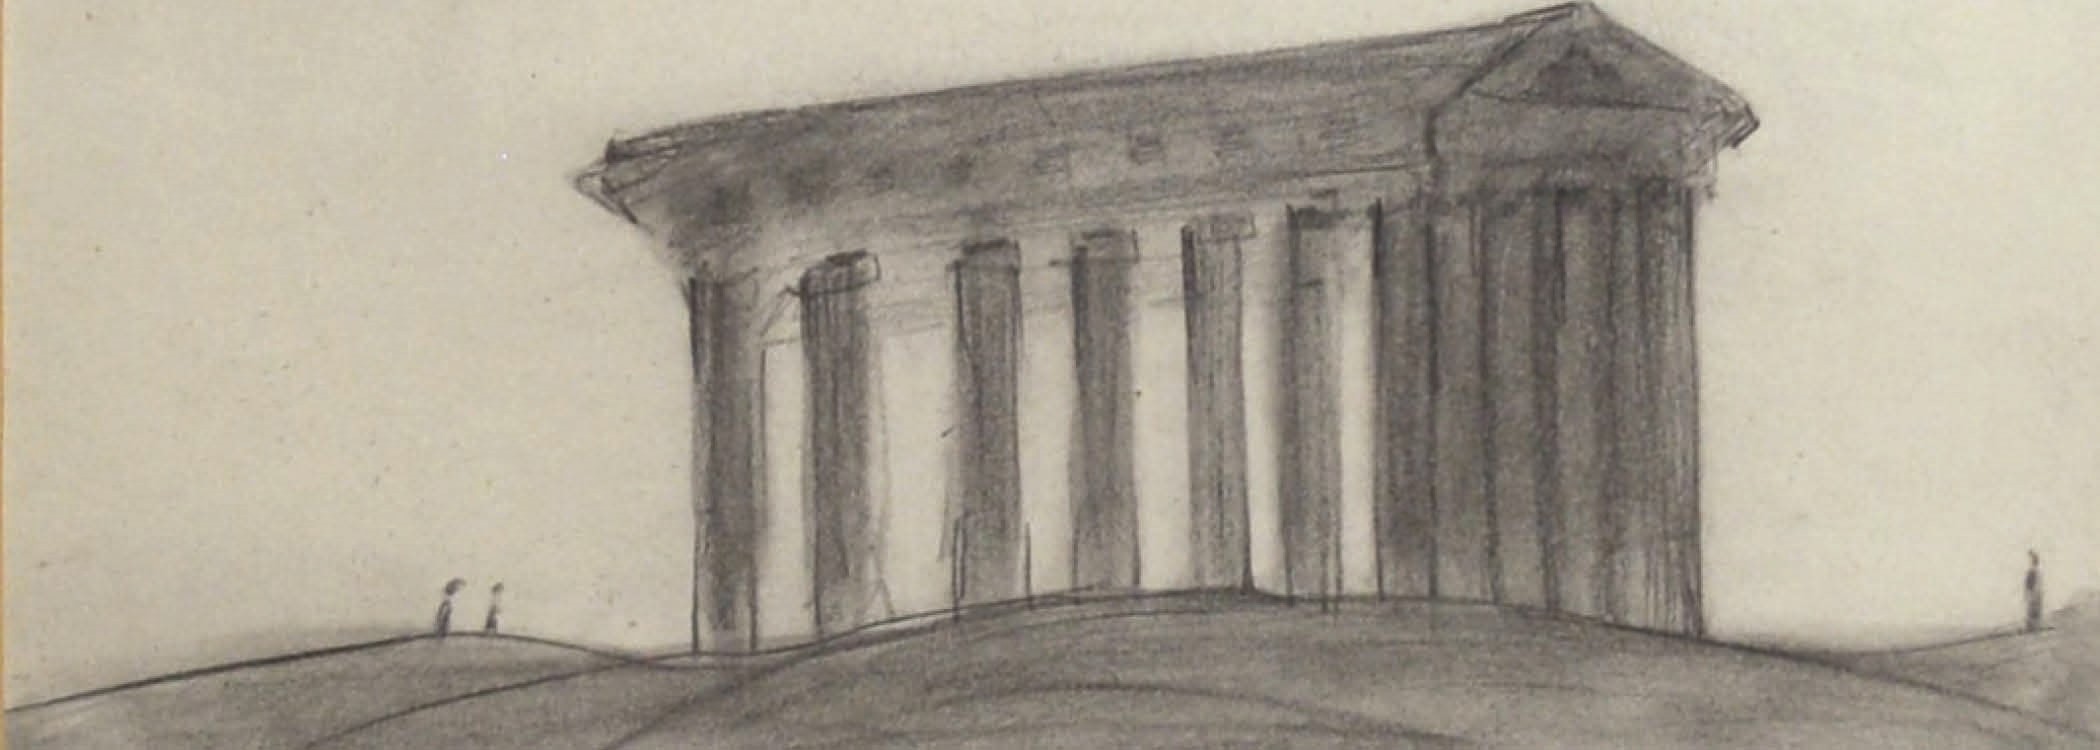 L.S Lowry sketch of Sunderland's Penshaw Monument up for Auction